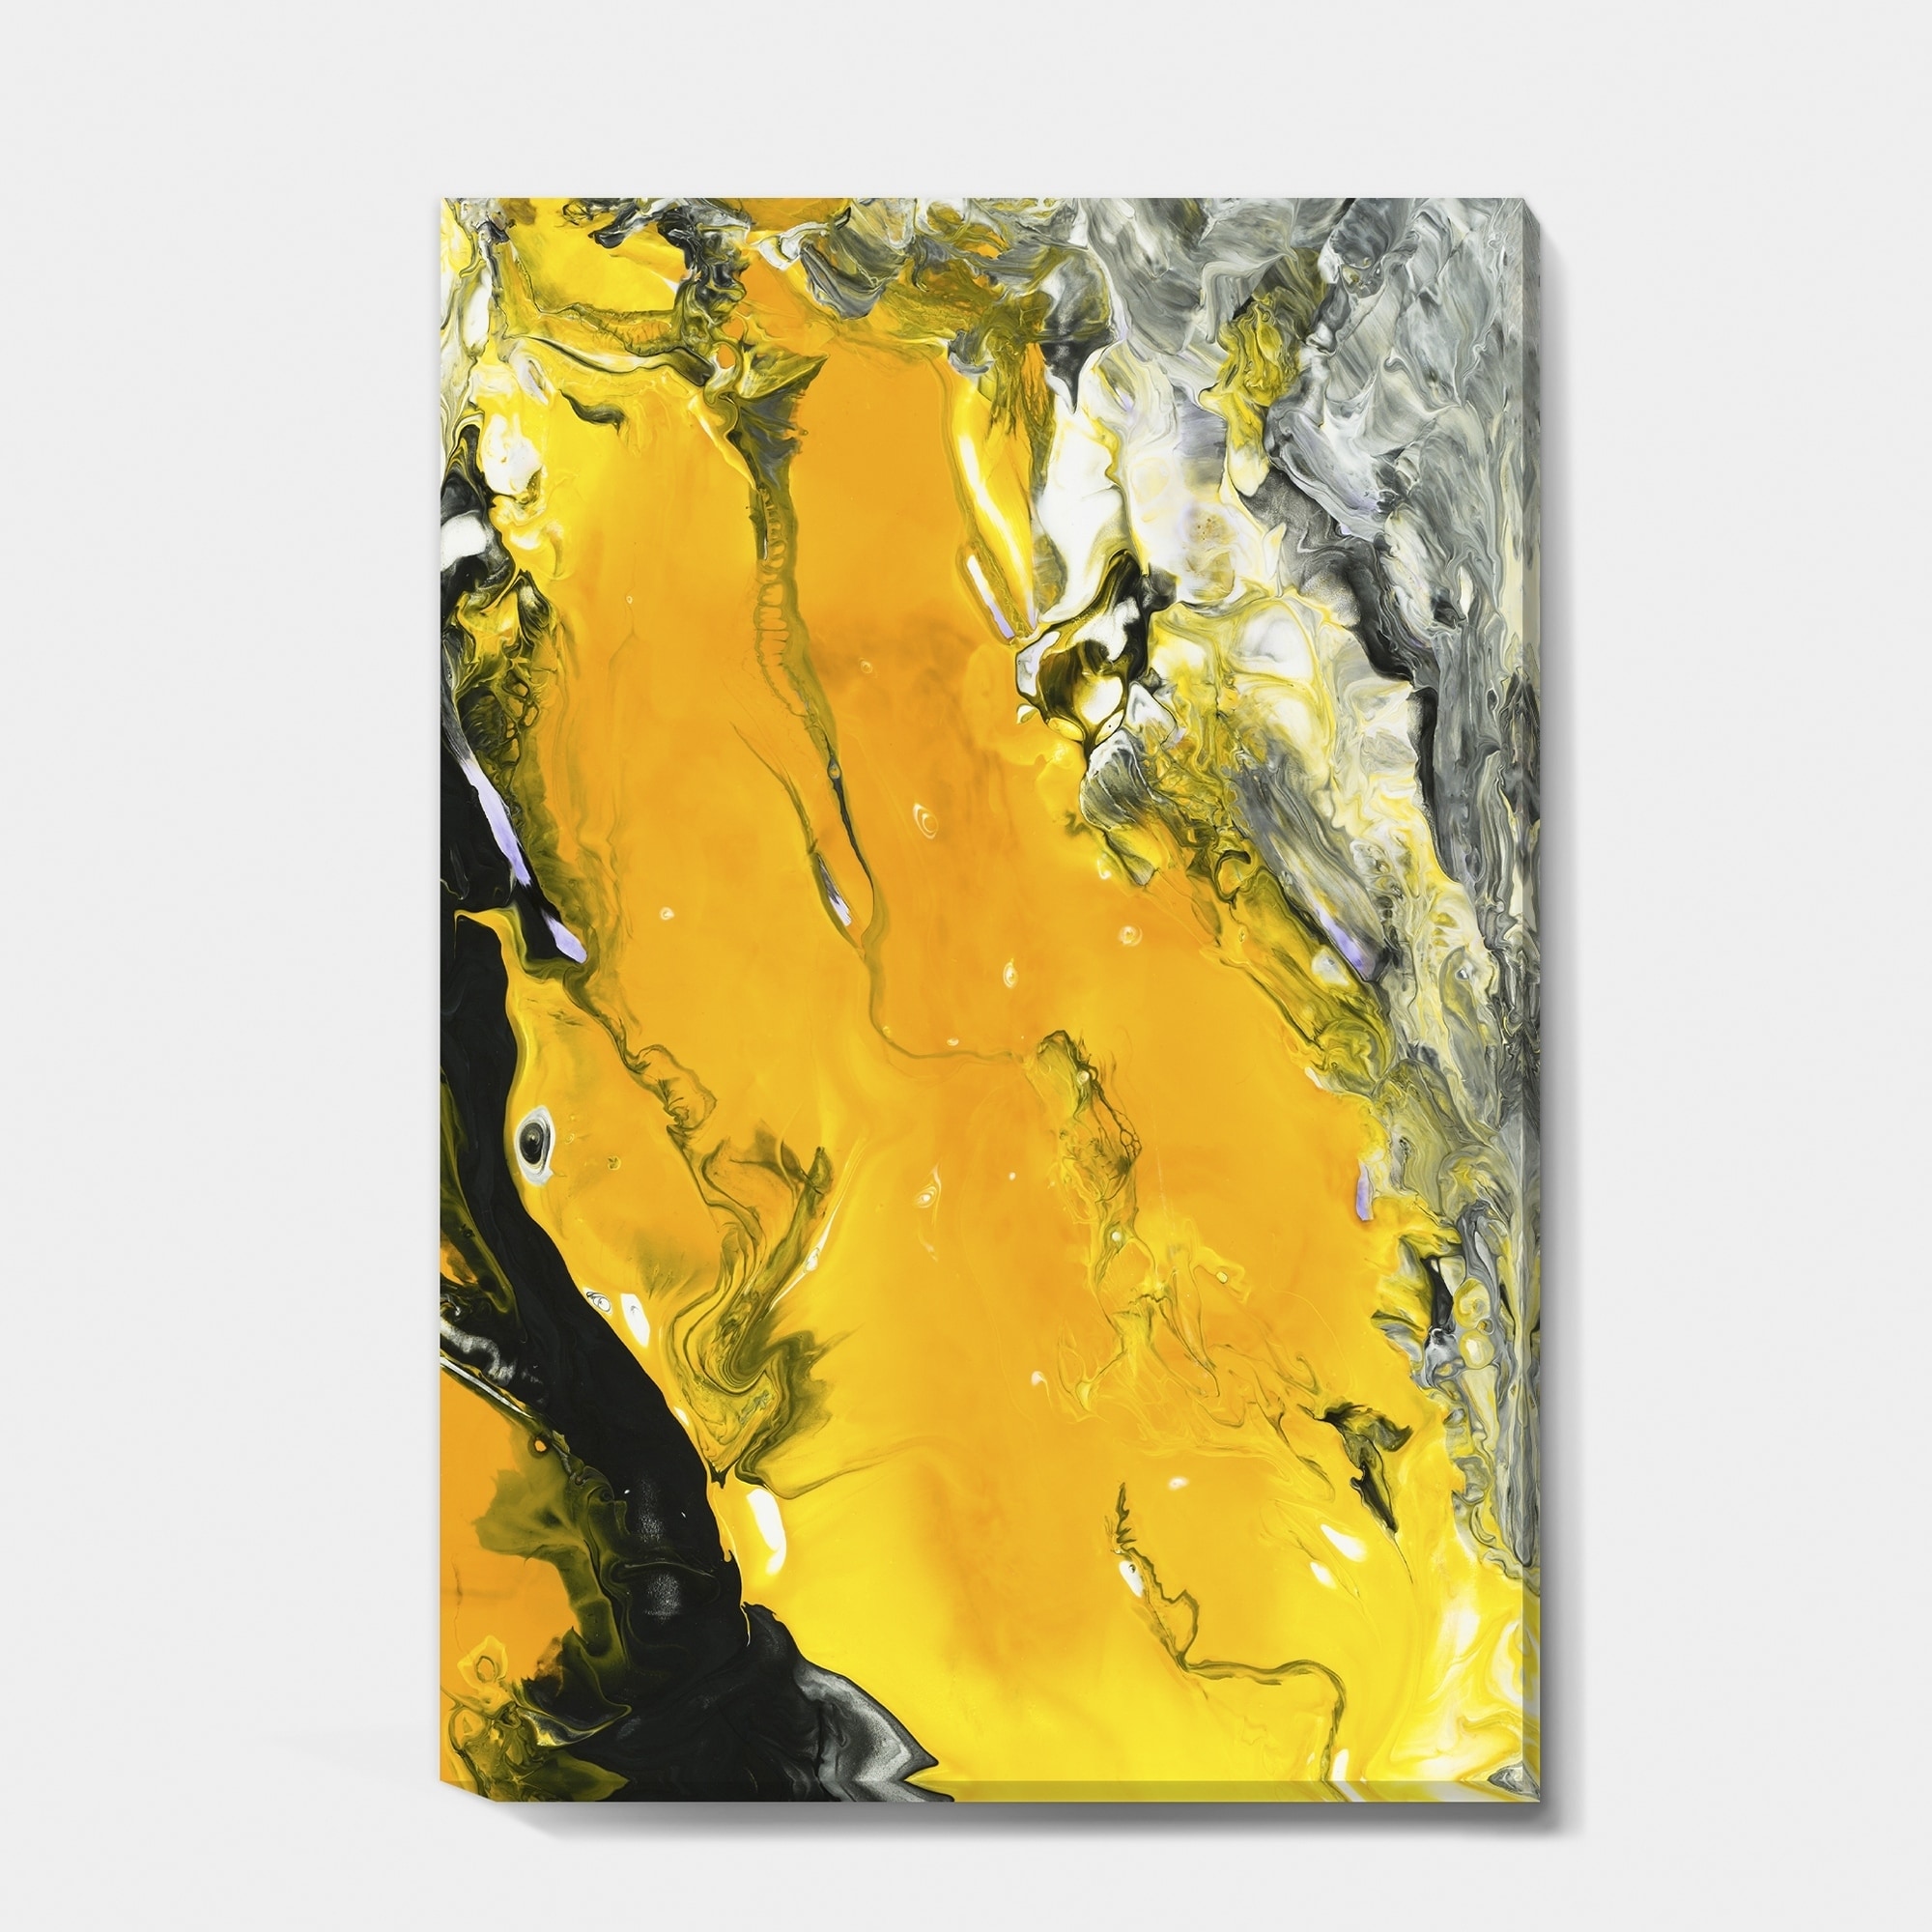 Shop Designart Yellow Black And Marbled Acrylic Painting Modern Contemporary Premium Canvas Wall Art Multi Color Overstock 26036177